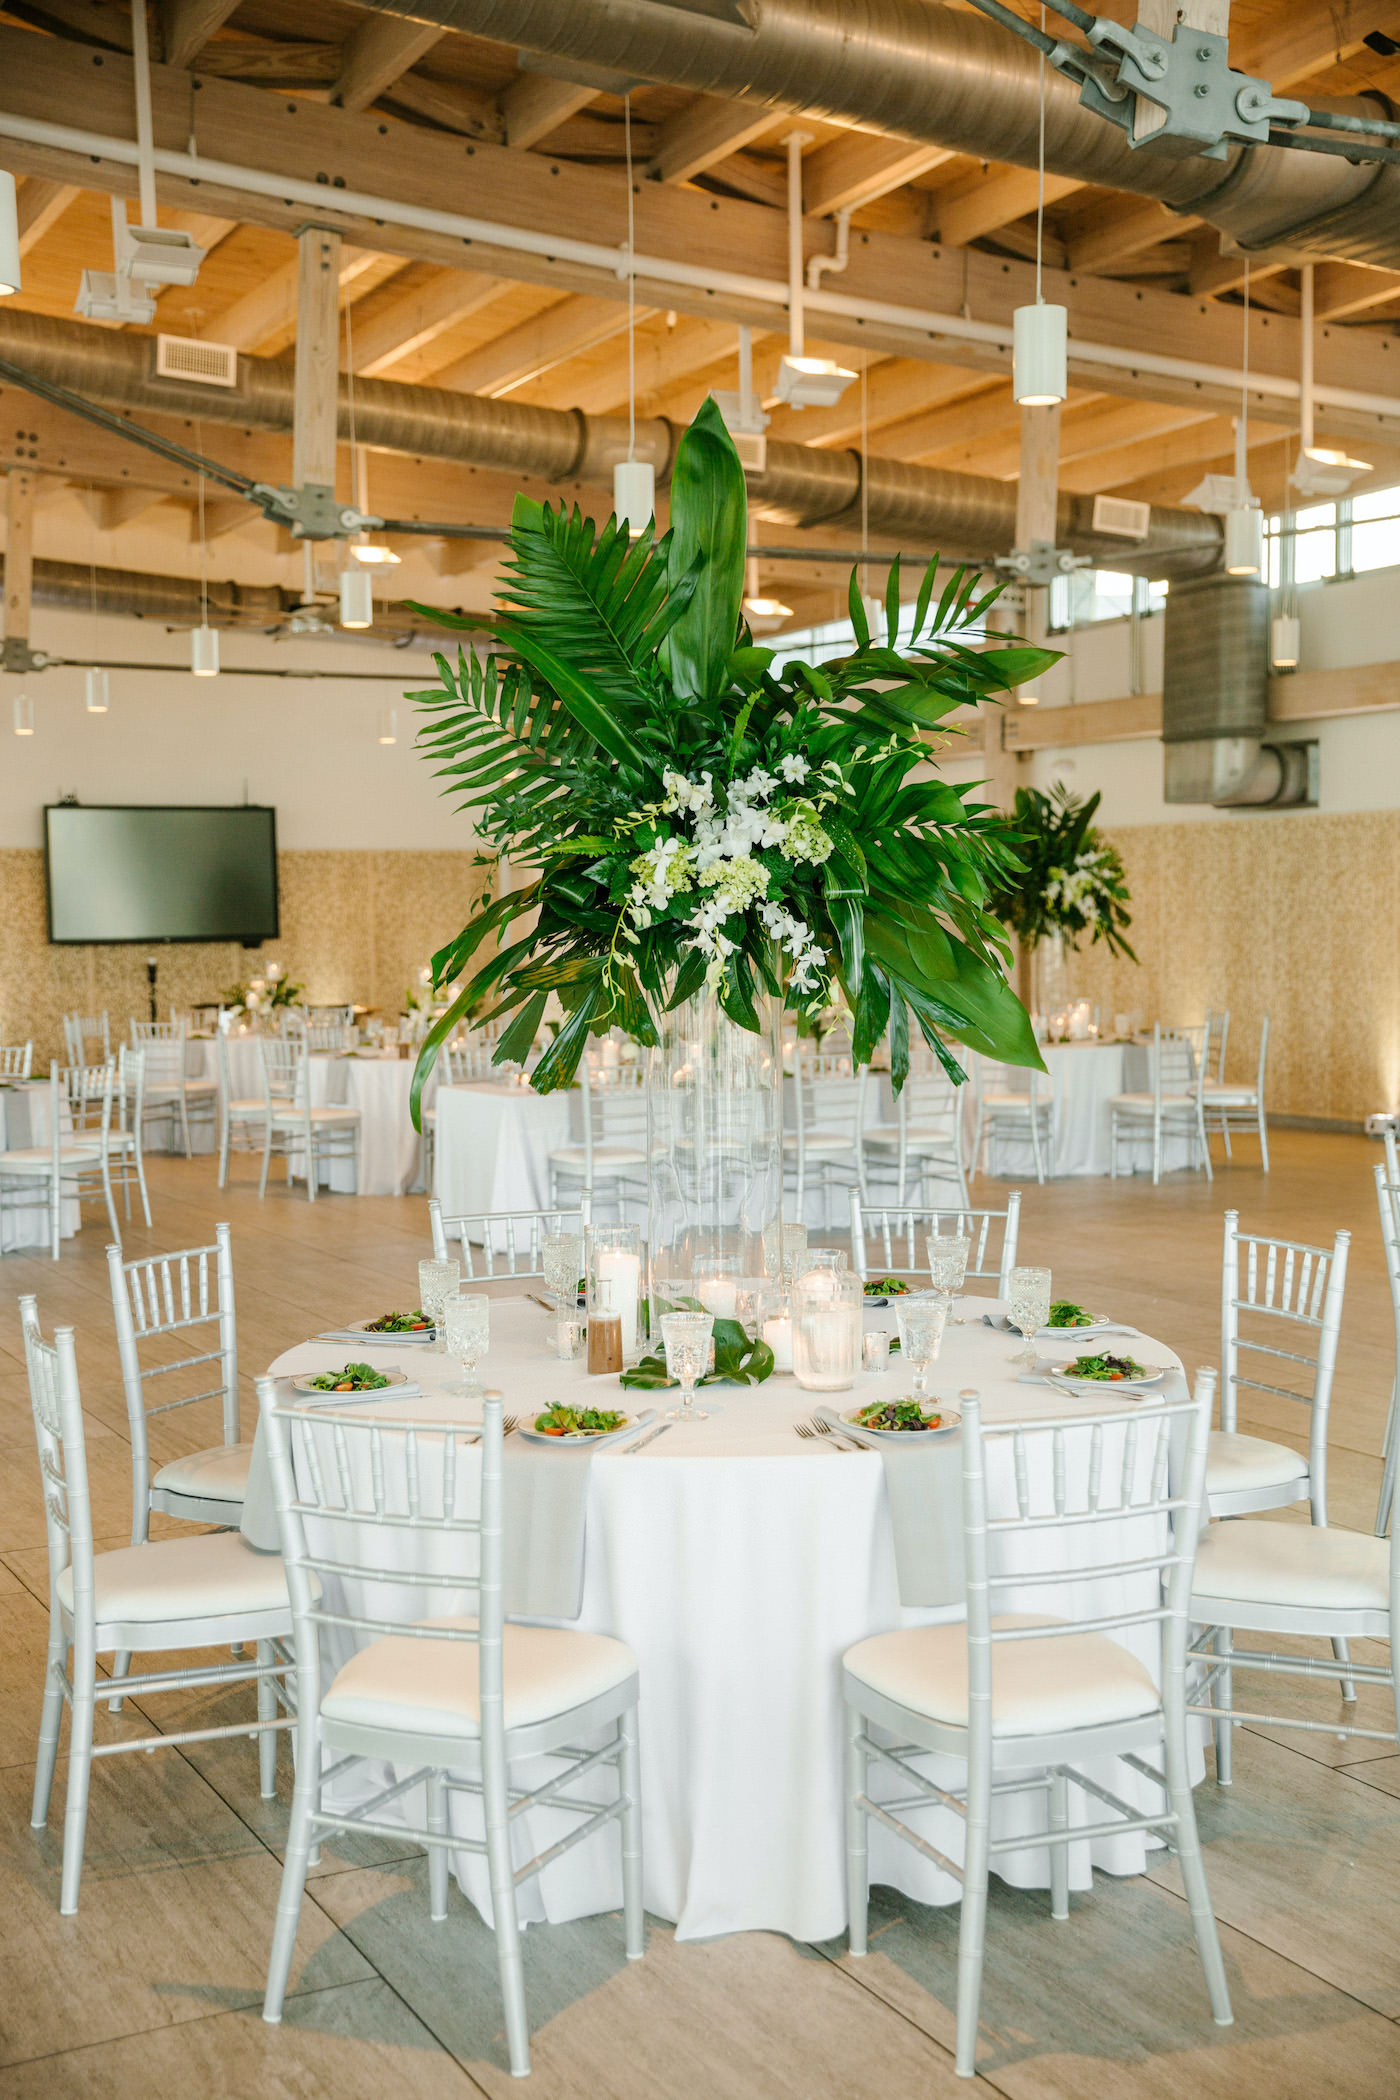 Tropical Tampa Florida Wedding Reception | White Wedding Reception Table with Silver Chiavari Chairs and Tall Tropical Palm Leaf Centerpiece with White Orchids | Tampa Wedding Florist Bruce Wayne Florals